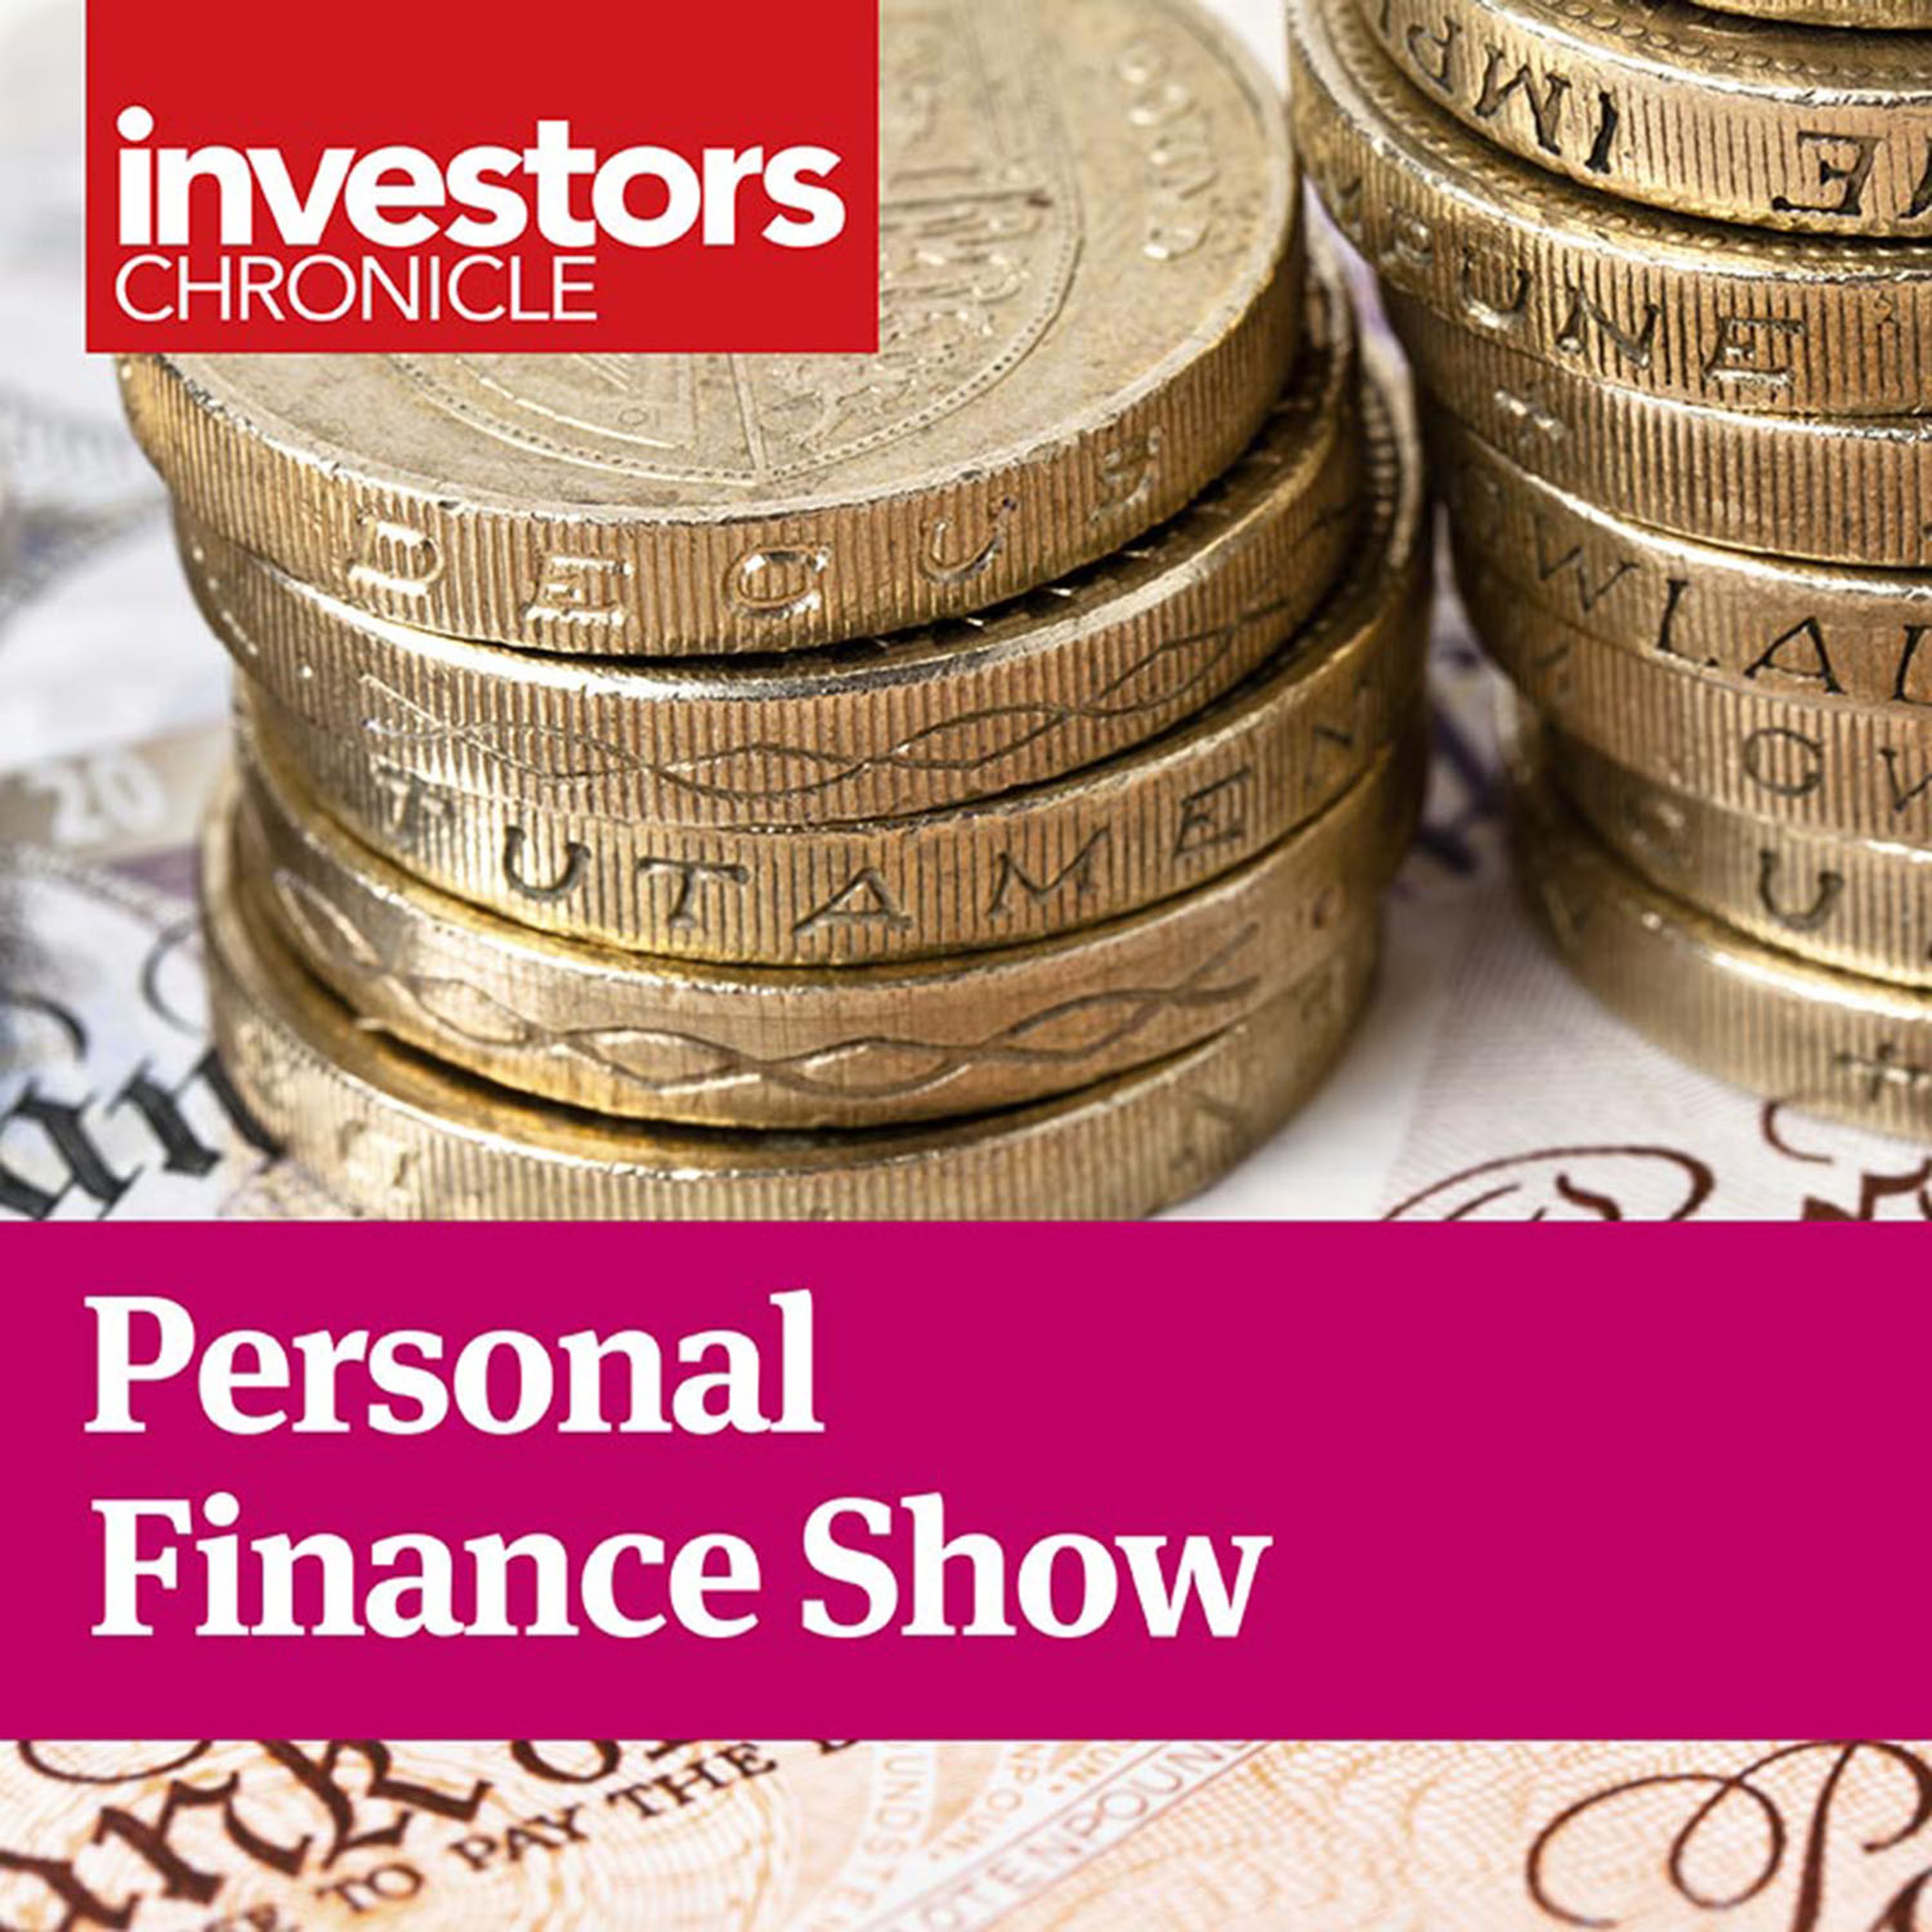 Personal Finance Show: Fund tips for 2018